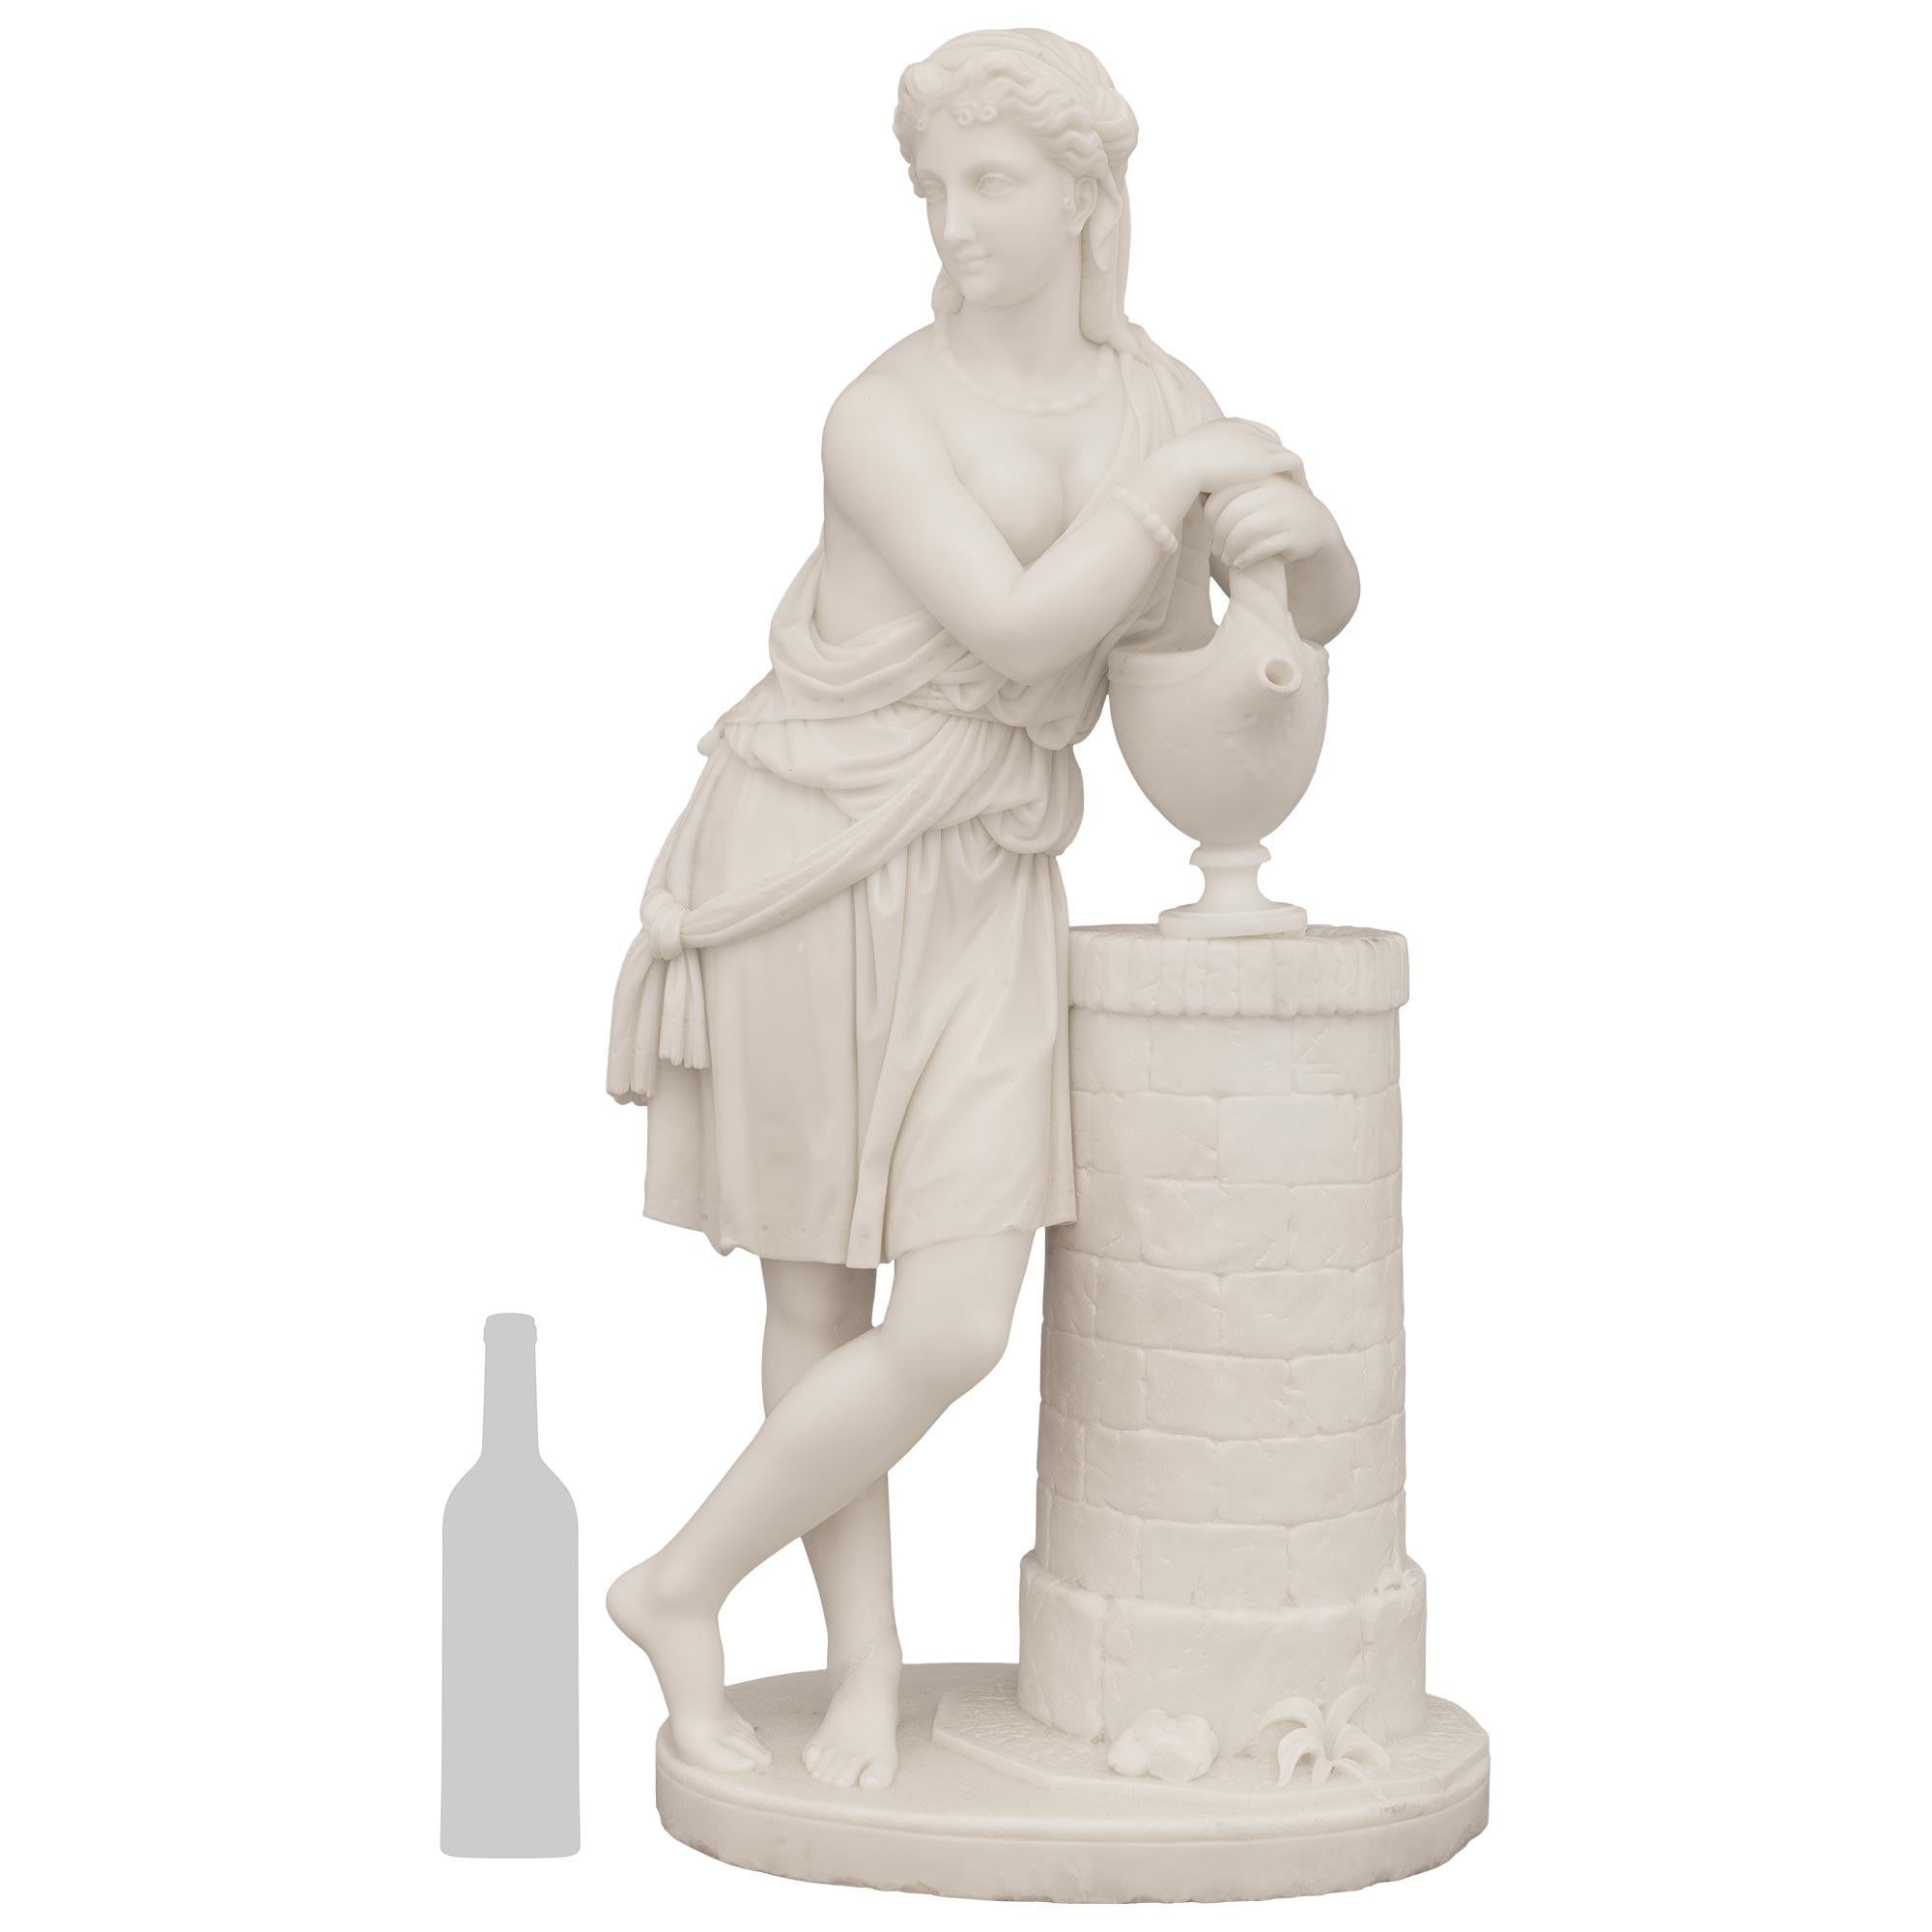 






A spectacular and highly detailed Italian early 19th century white Carrara marble statue of Rebecca at the well, signed by Carmelo Fontana (1775-1825). Rebecca is standing proudly on an oval shaped marble base with foliage and is leaning